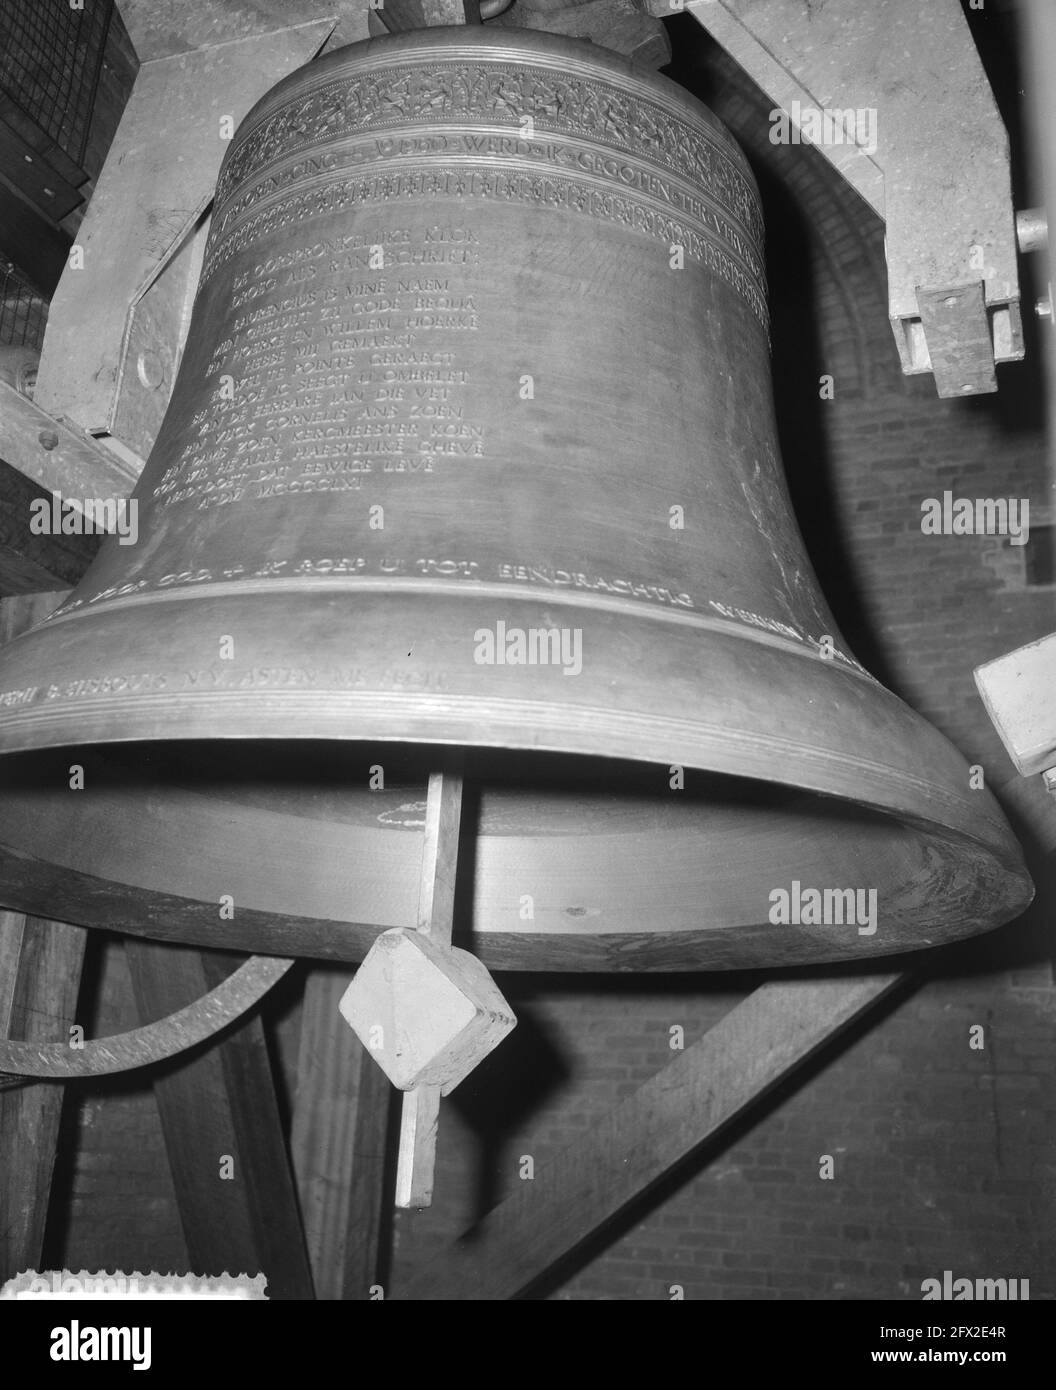 Chimes of the St. Laurens in Rotterdam, December 31, 1960, The Netherlands, 20th century press agency photo, news to remember, documentary, historic photography 1945-1990, visual stories, human history of the Twentieth Century, capturing moments in time Stock Photo